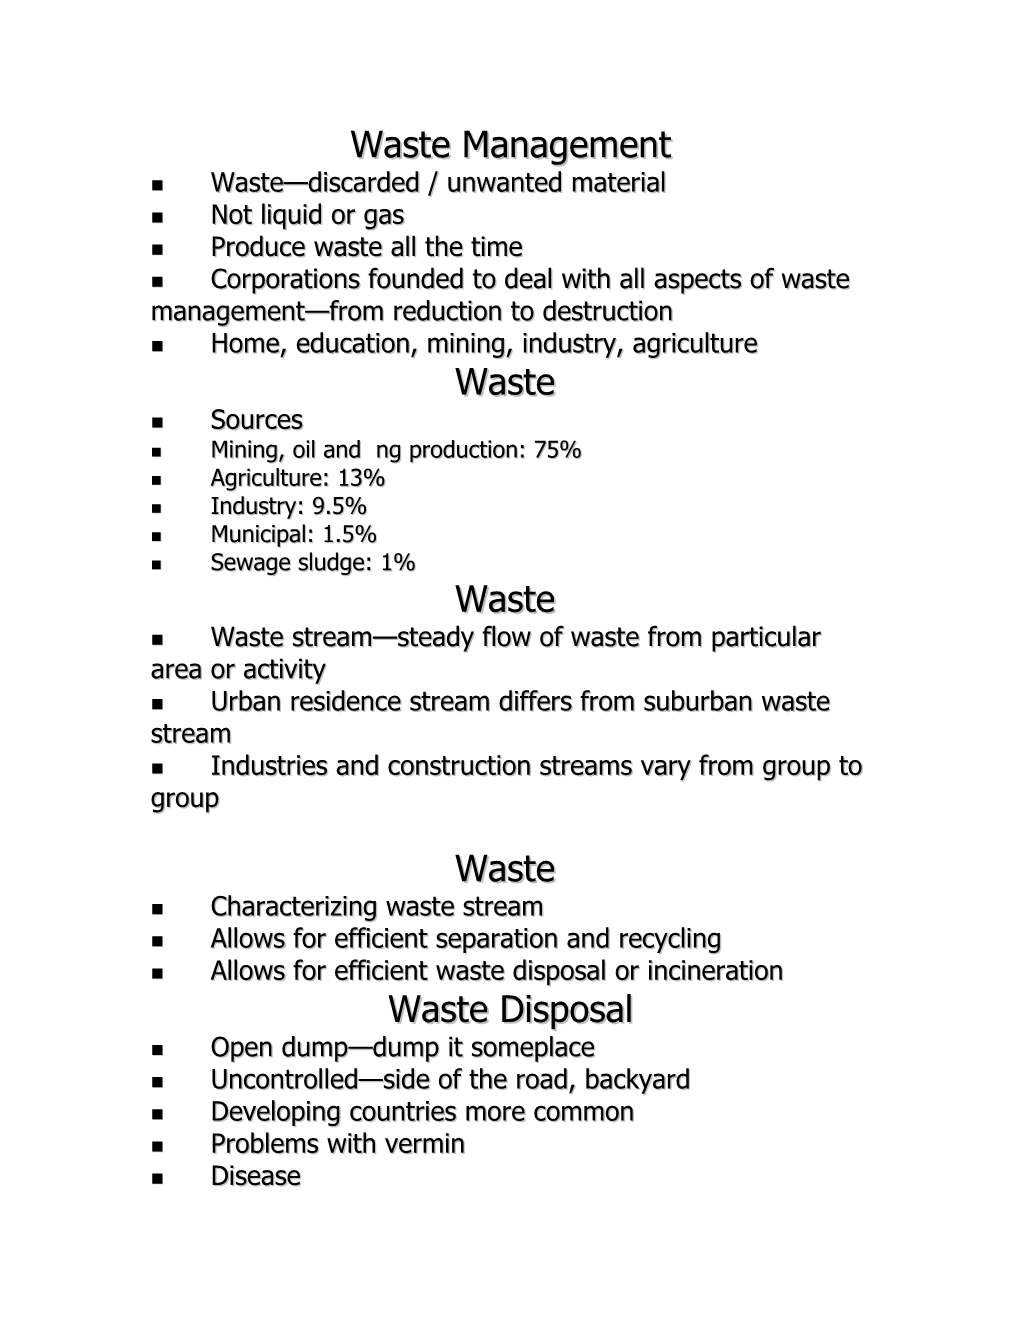 Waste Discarded / Unwanted Material